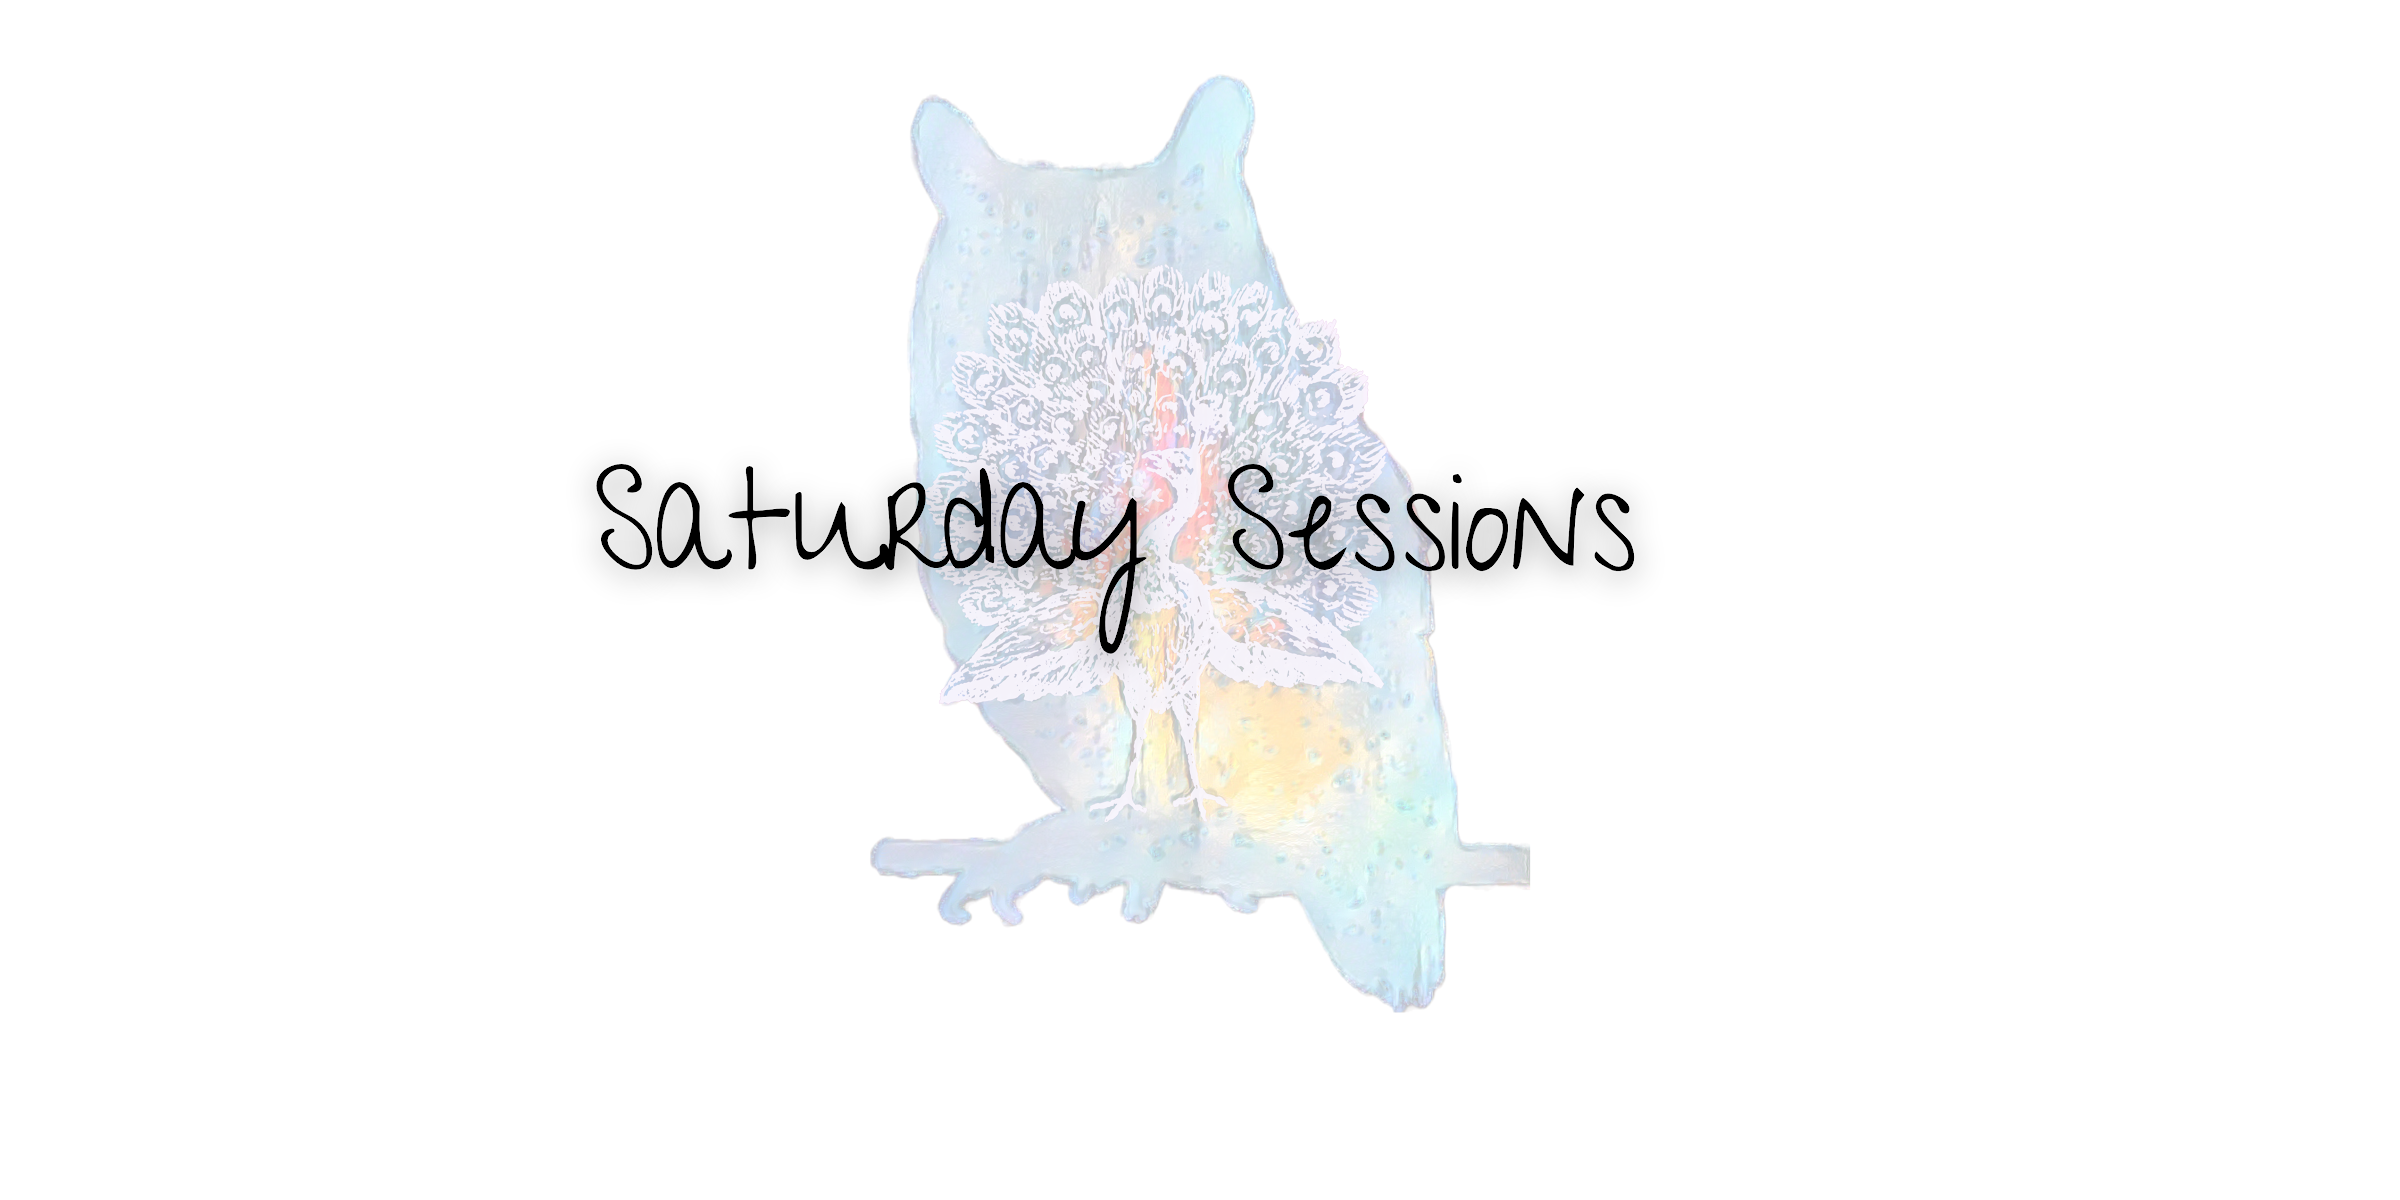 Saturday Sessions: Compassion as a Spiritual Practice